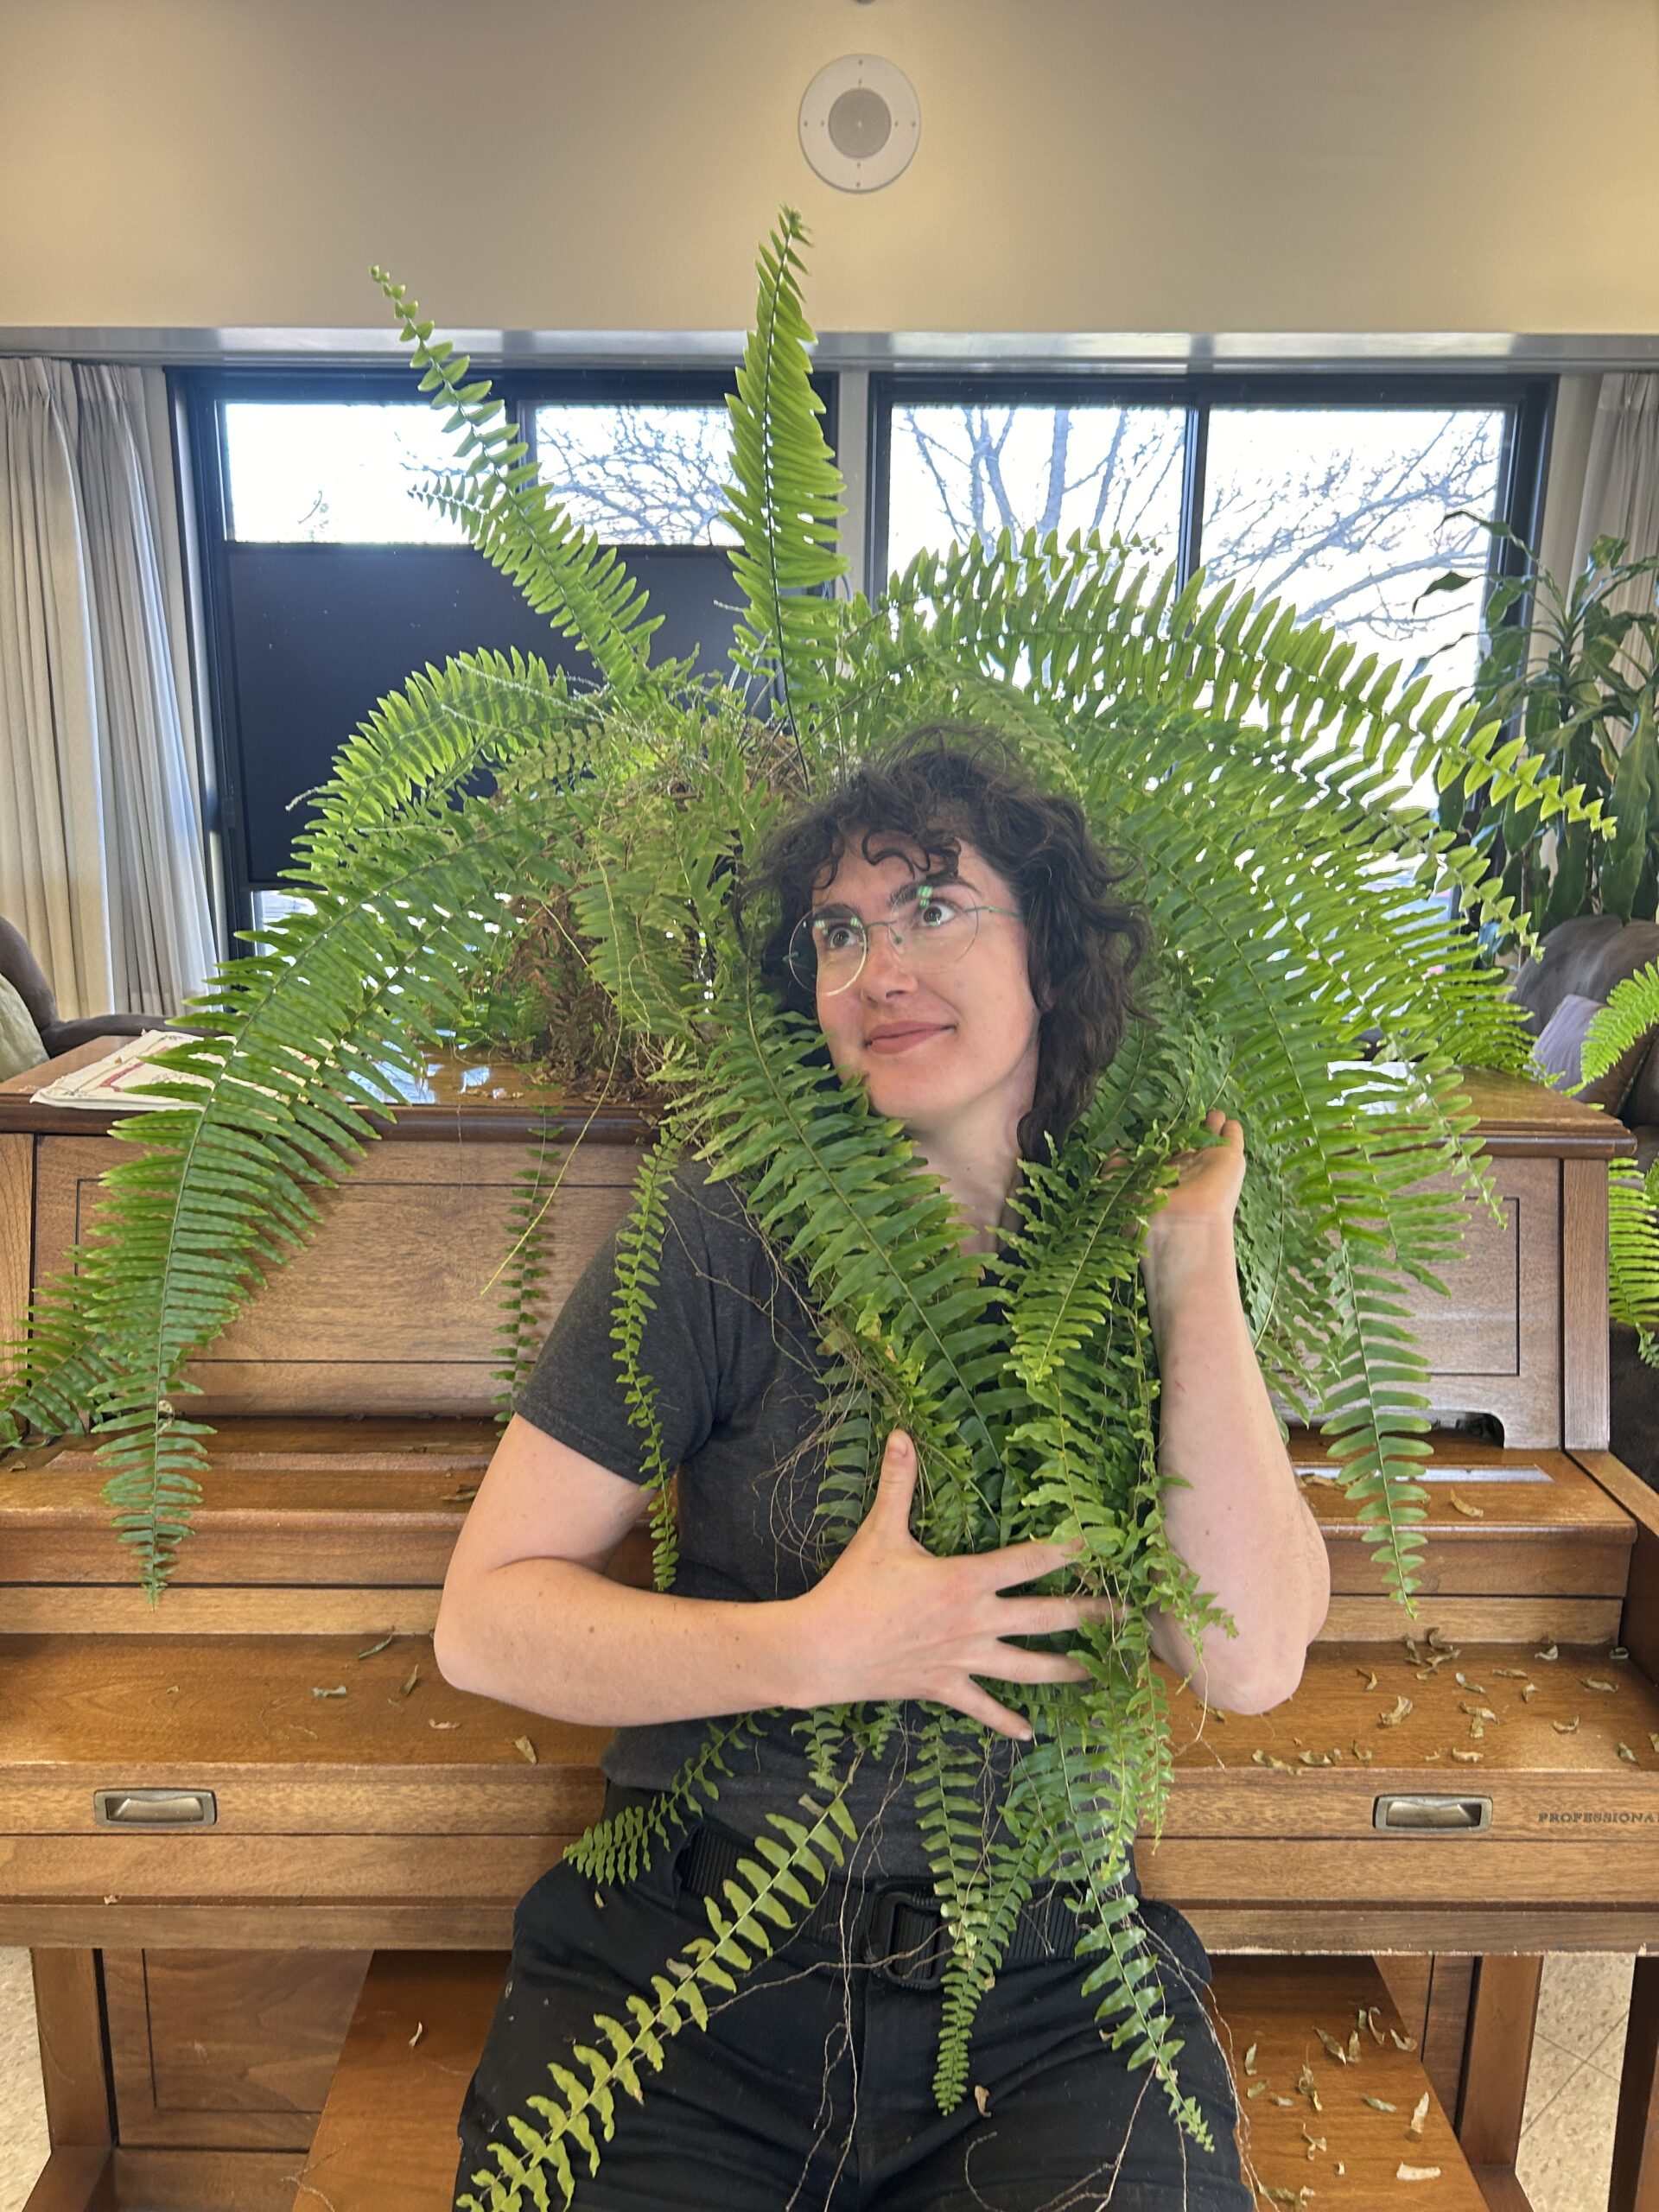 Starr is sitting on a bench in front of a piano. There is a large fern on top of the piano, and she is posing with the fronds around her shoulders like long hair.